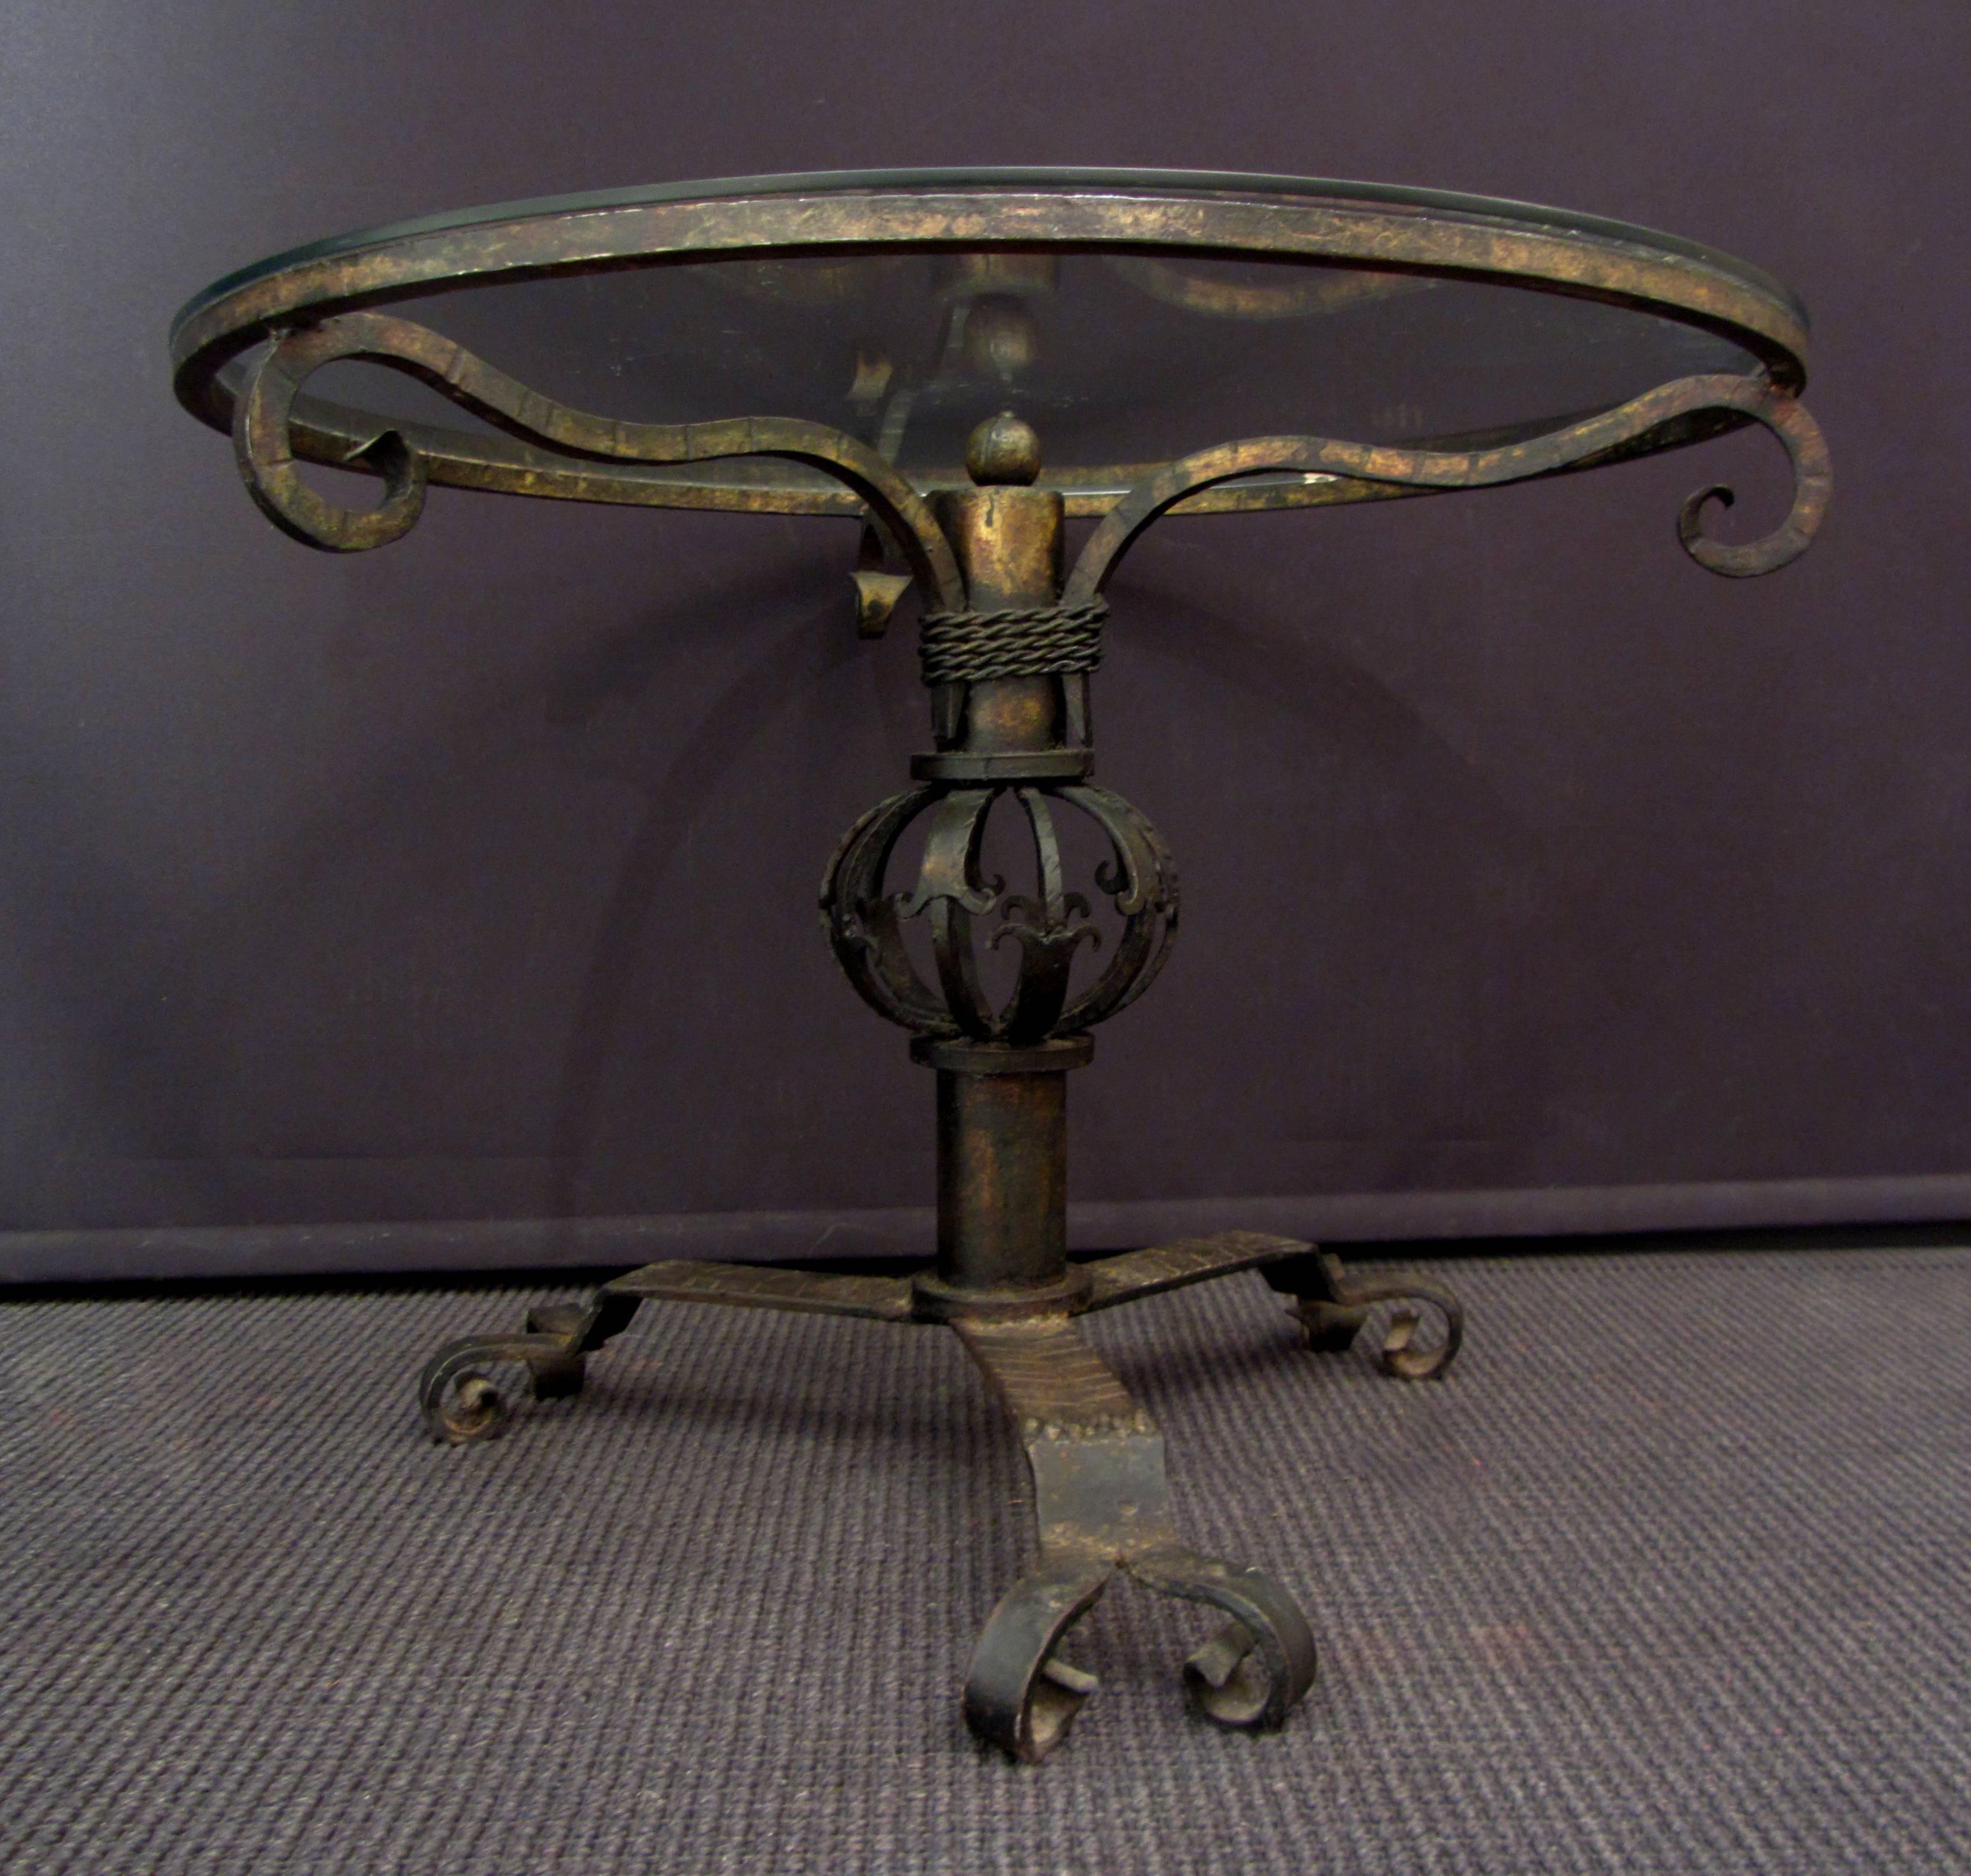 Unusual Wrought Iron Coffee Table In Excellent Condition For Sale In London, GB